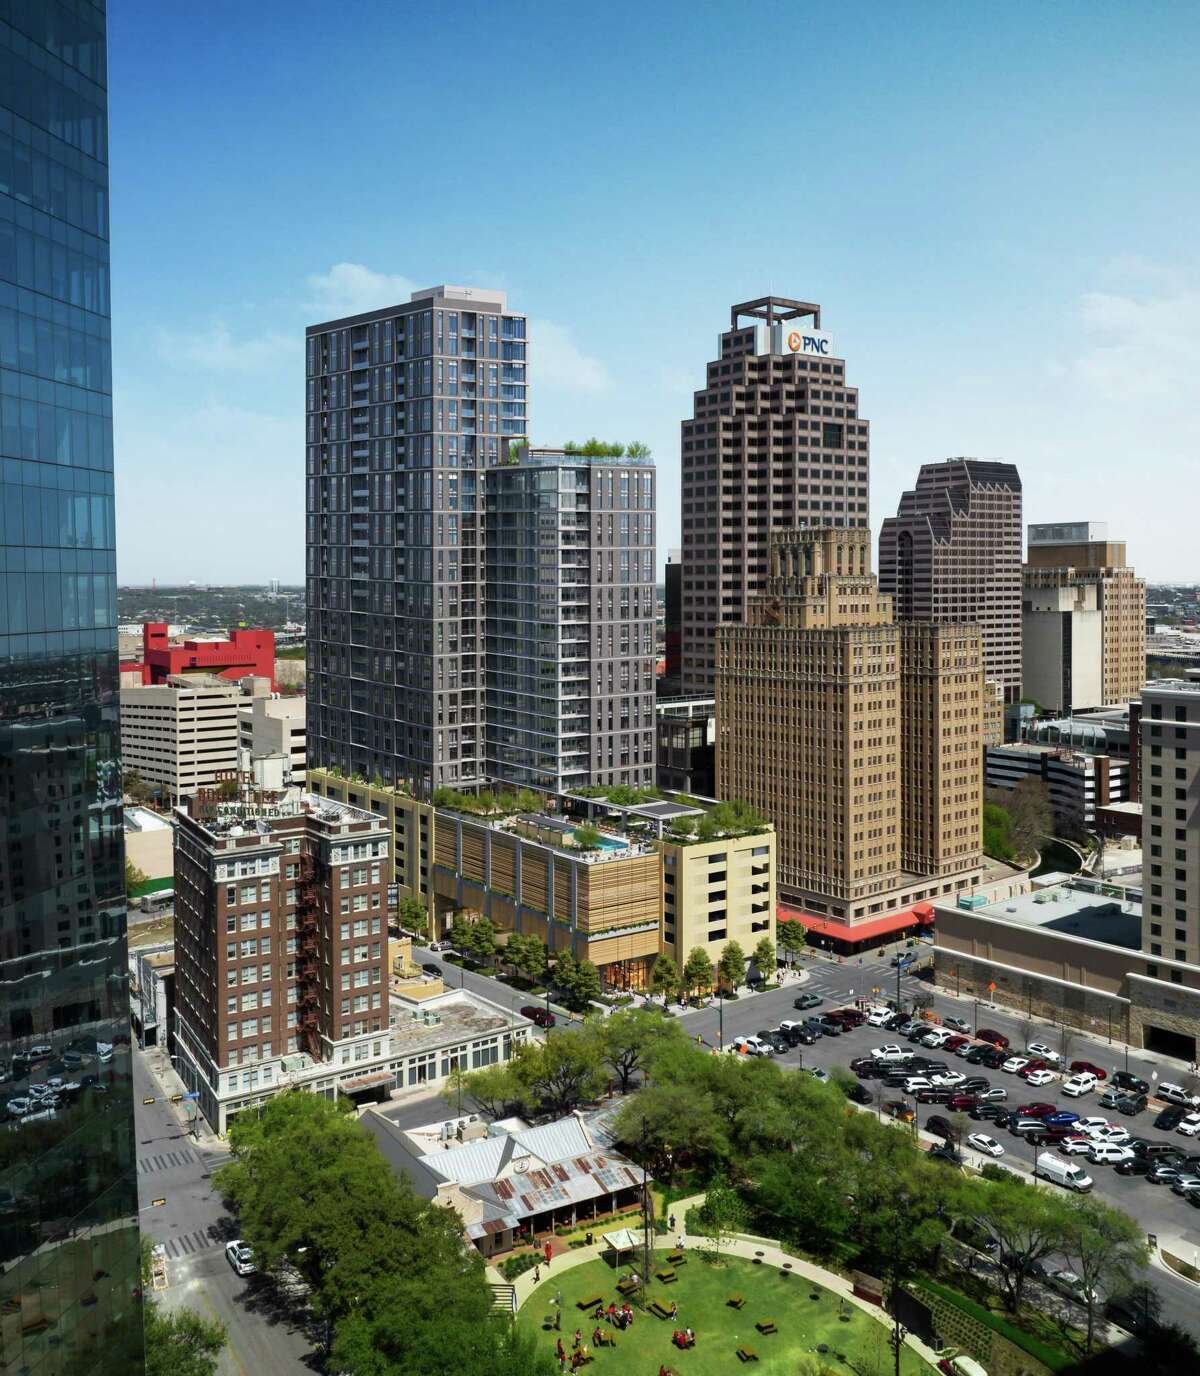 Renderings of the residential tower Weston Urban plans to build at the corner of North Main Avenue and East Travis Street in downtown San Antonio.